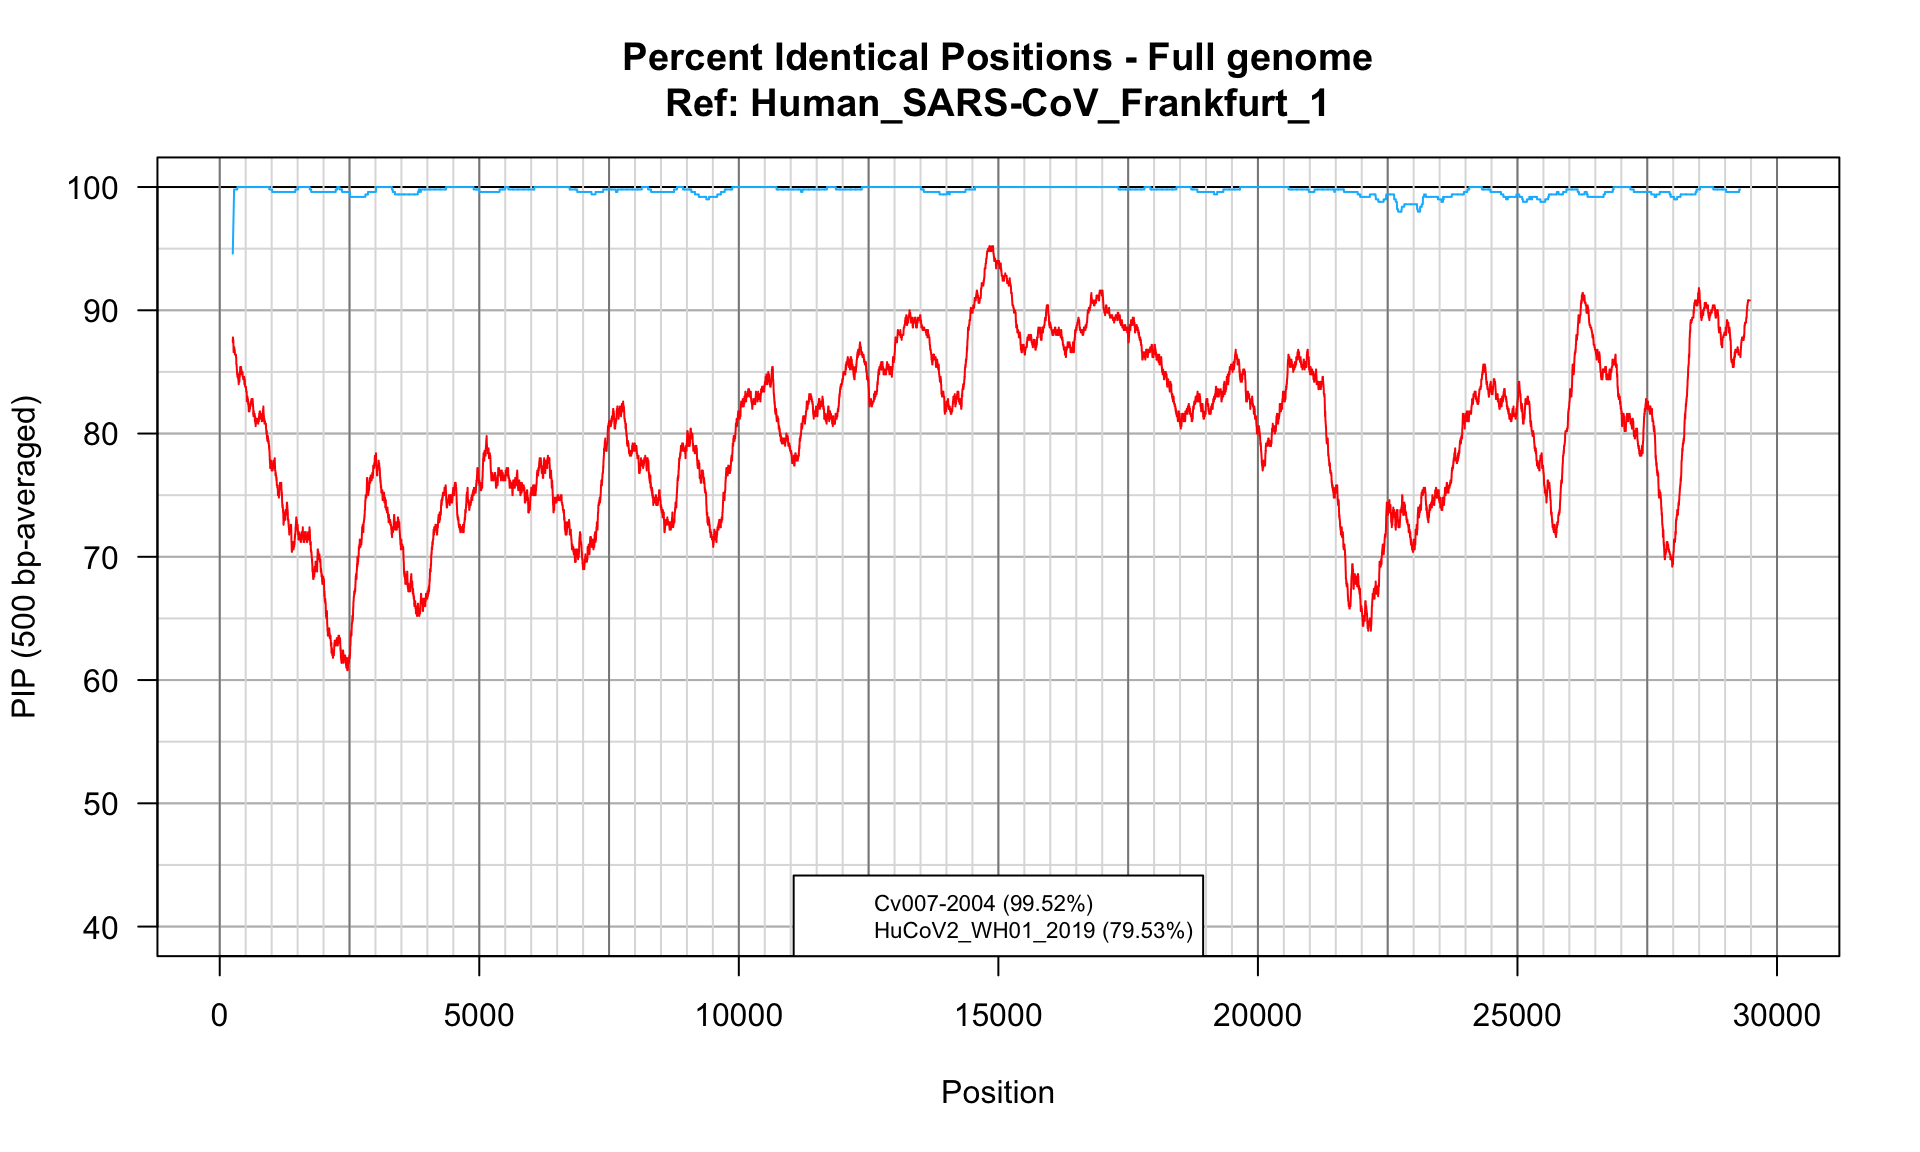 Percent Identical Positions profile over the whole genome of SARS (2002-2003). 